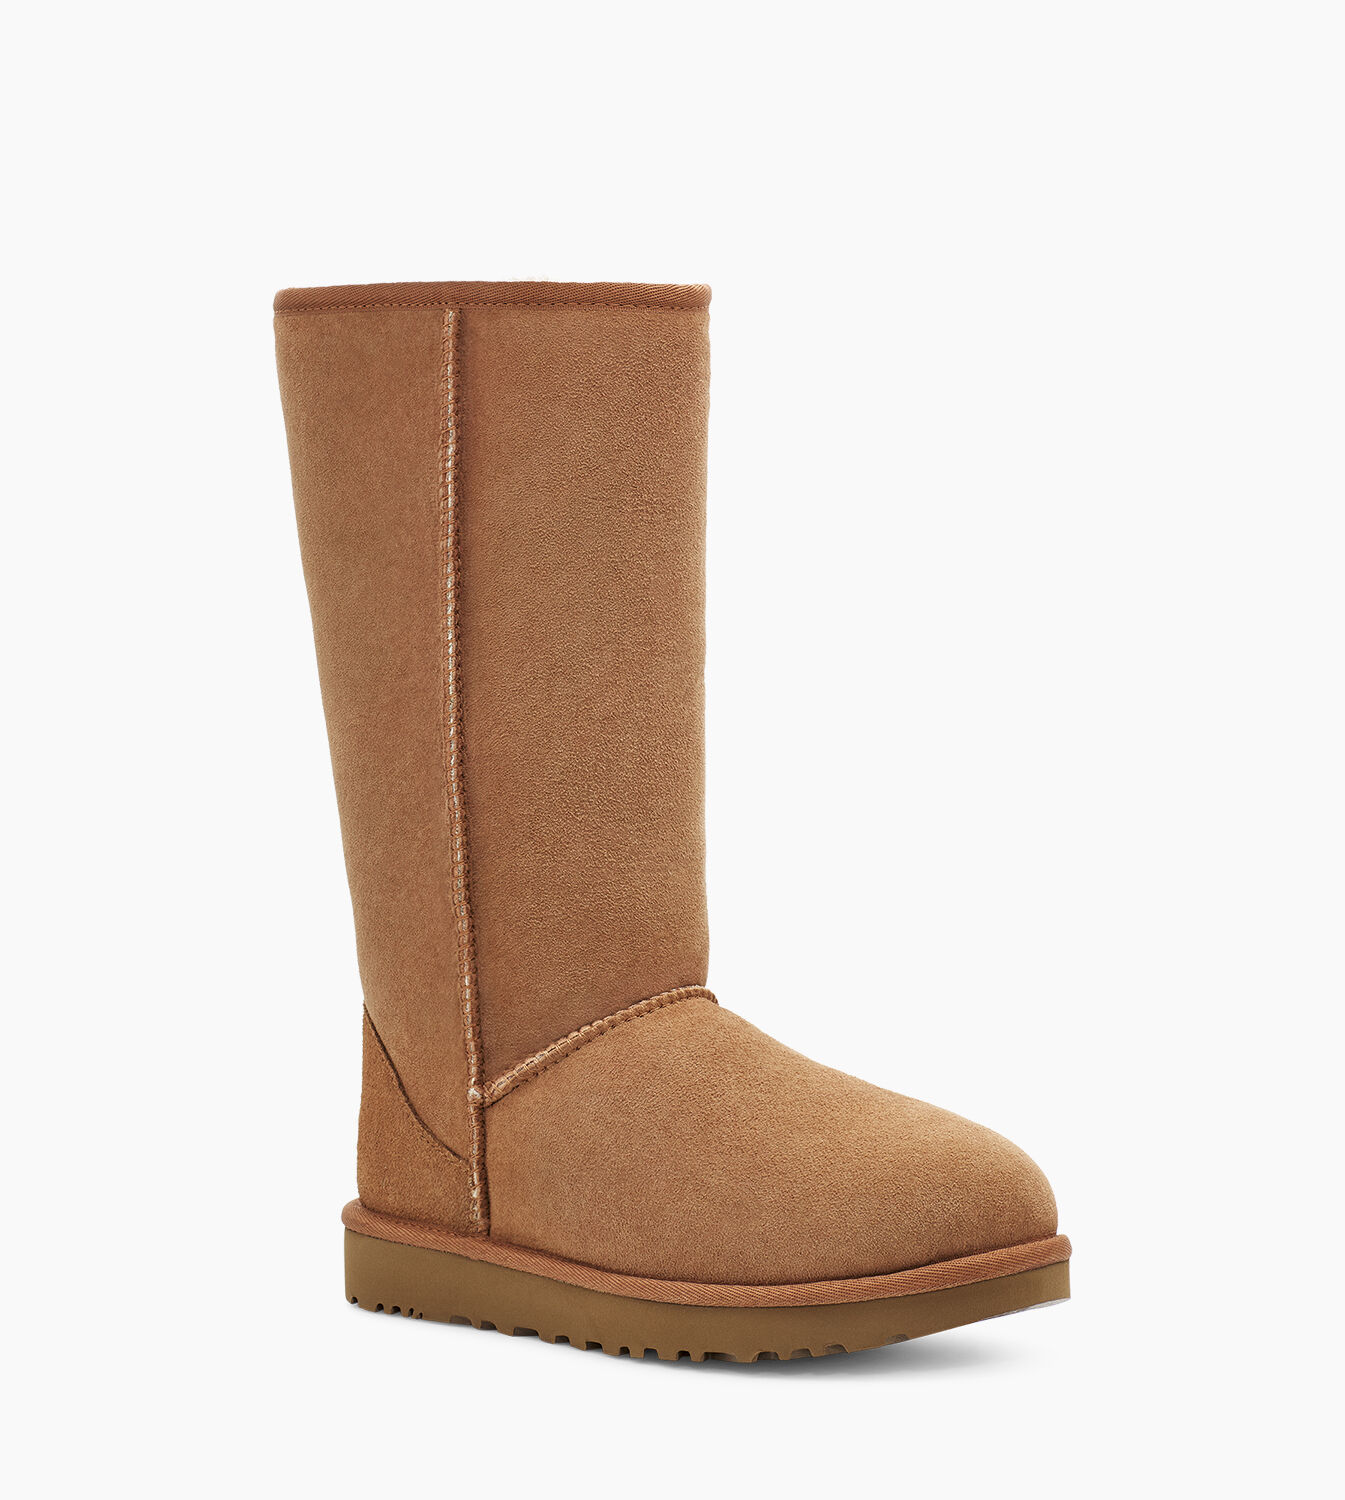 uggs shoes for women